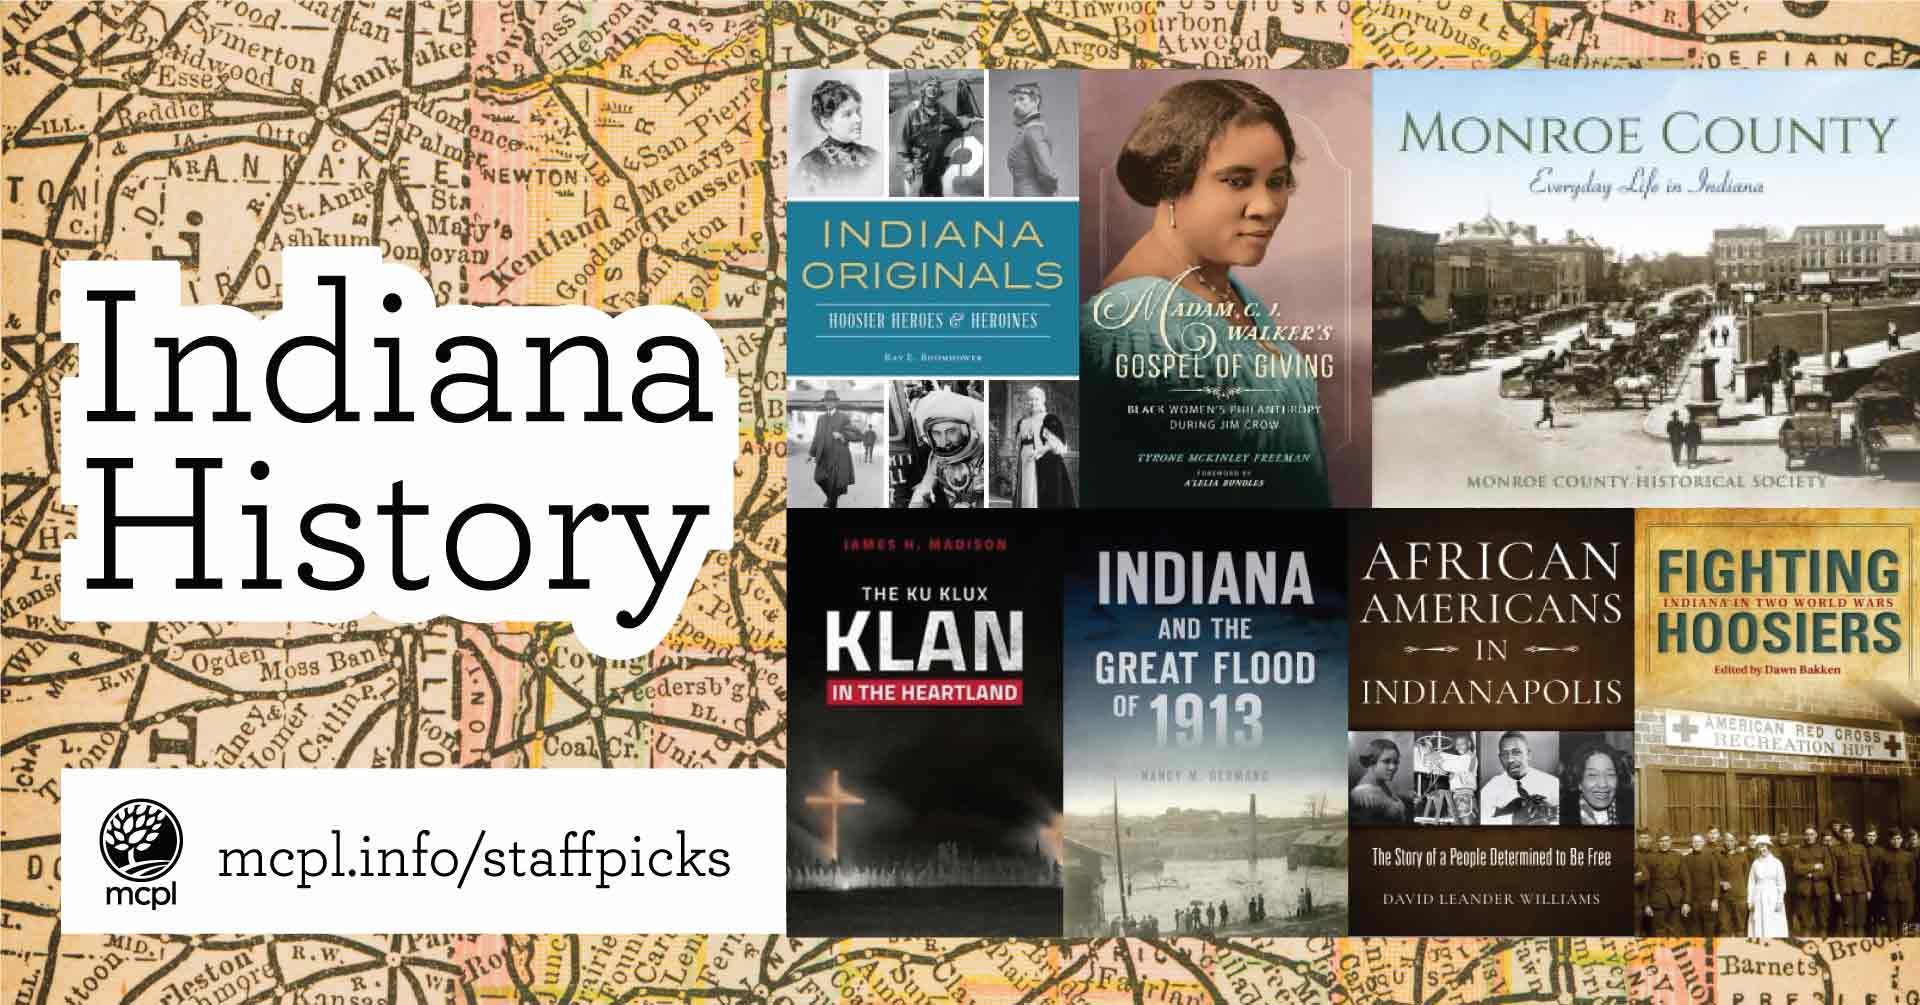 A collage of book covers with a map of indiana as the background. Text reads "Indiana History"